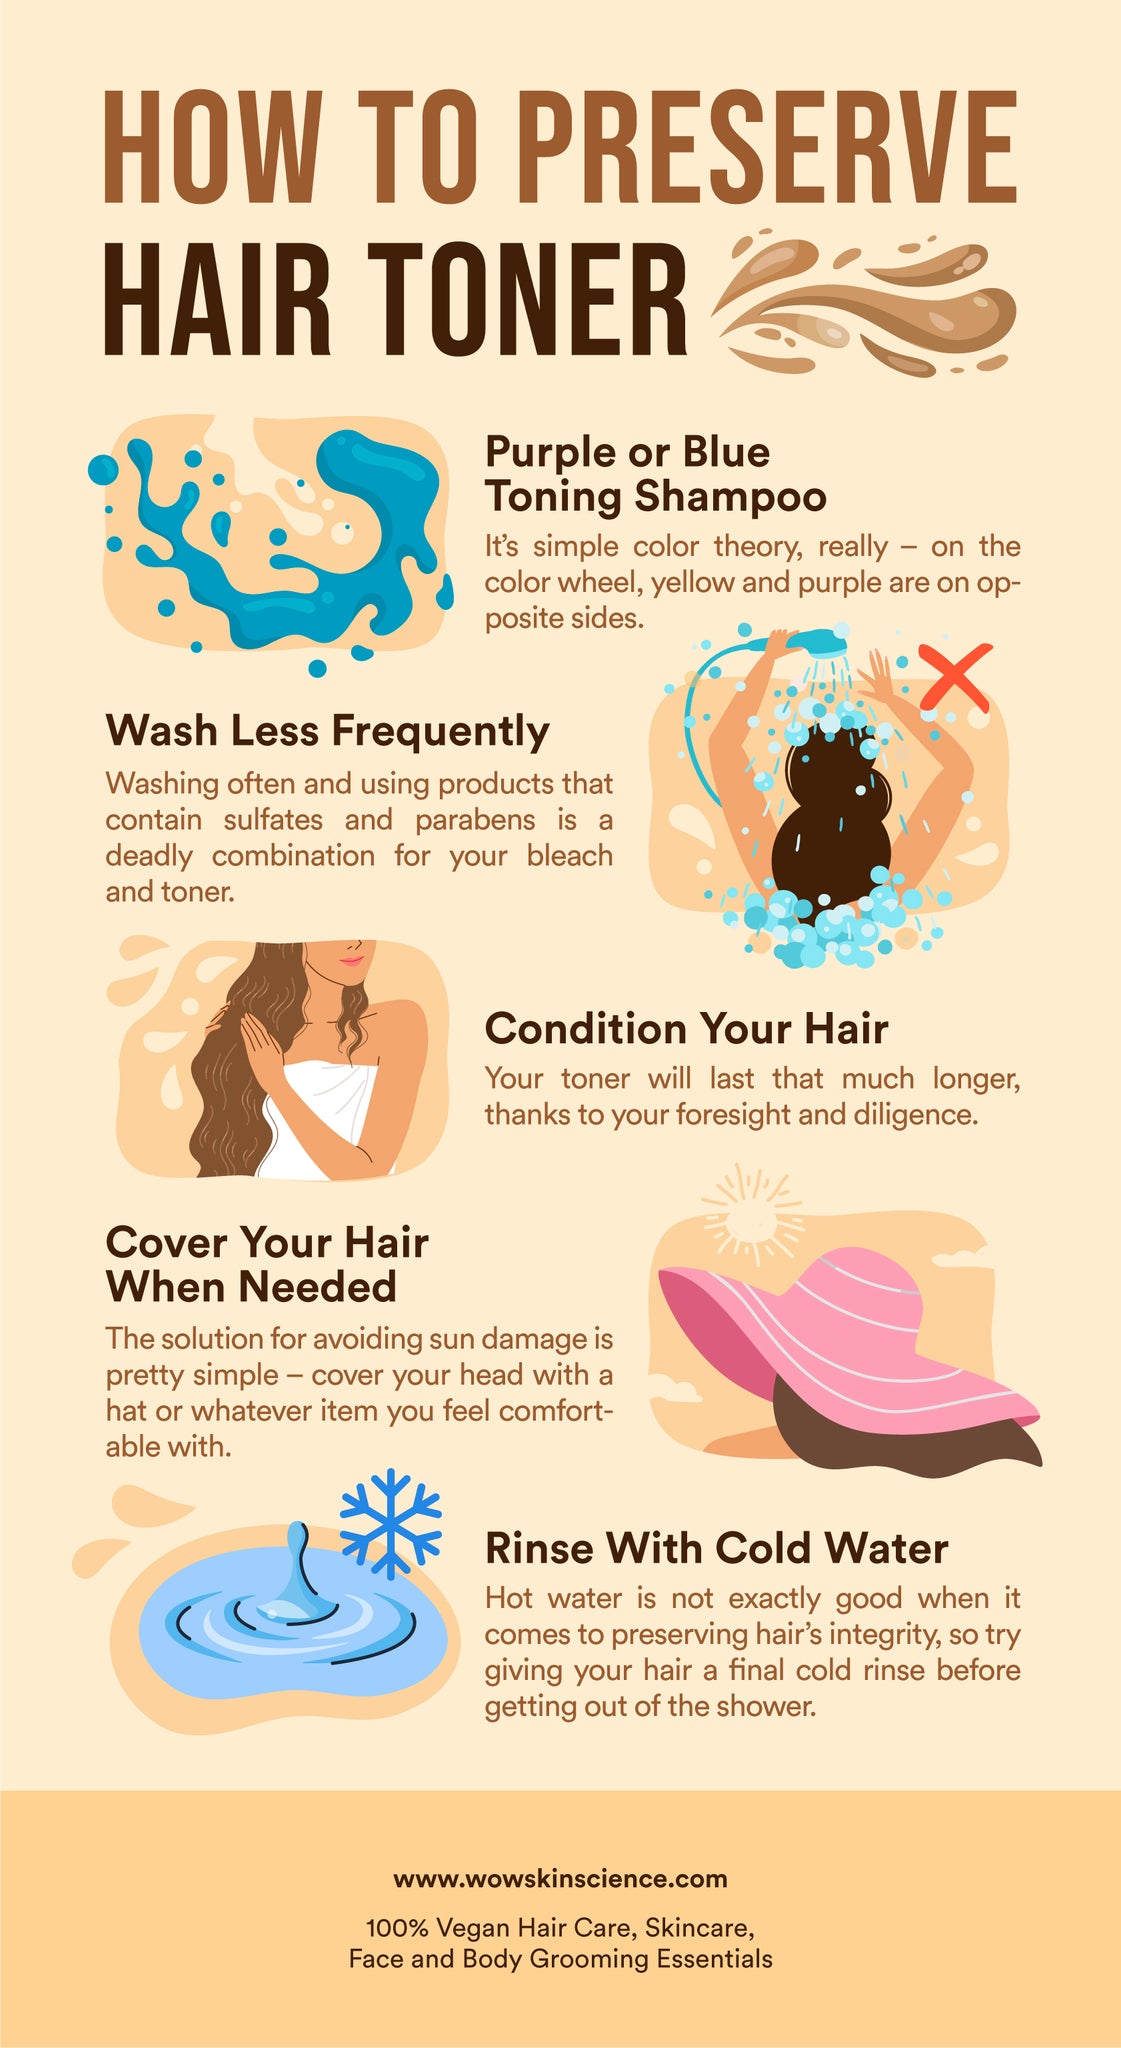 How Long Does Hair Toner Last? Best Ways to Preserve It